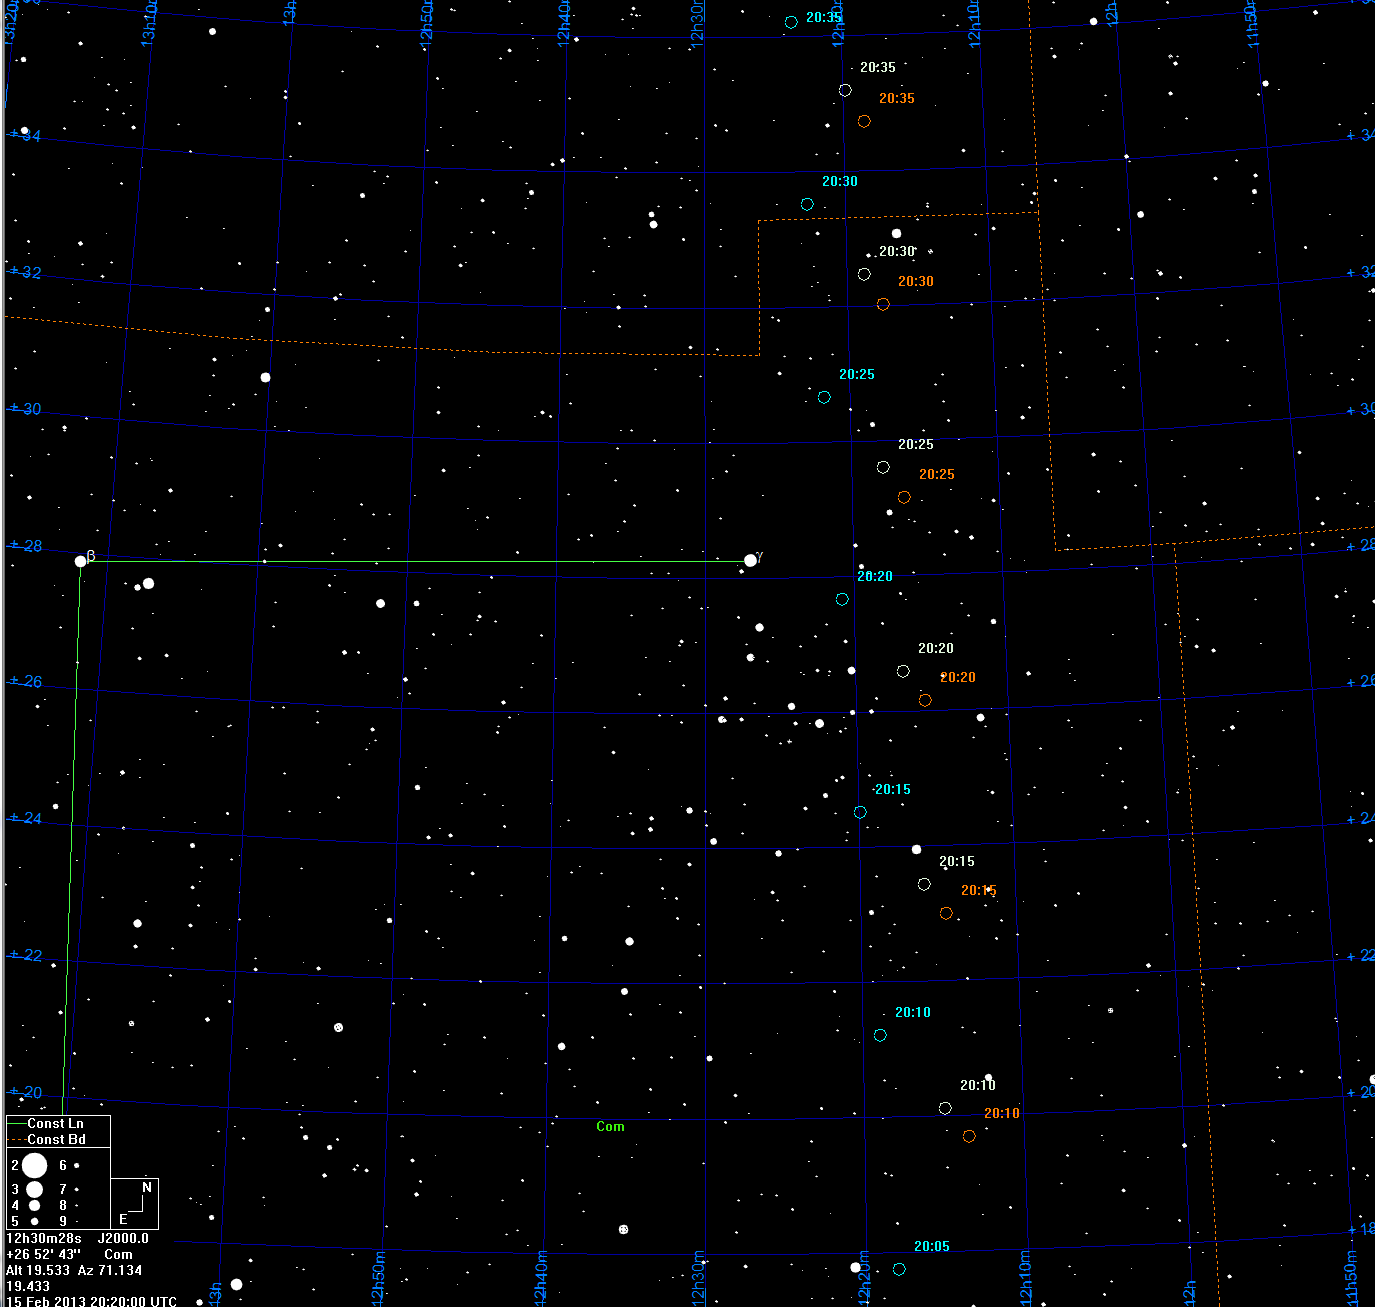 Finding Asteroid 2012 DA14 in the Netherlands